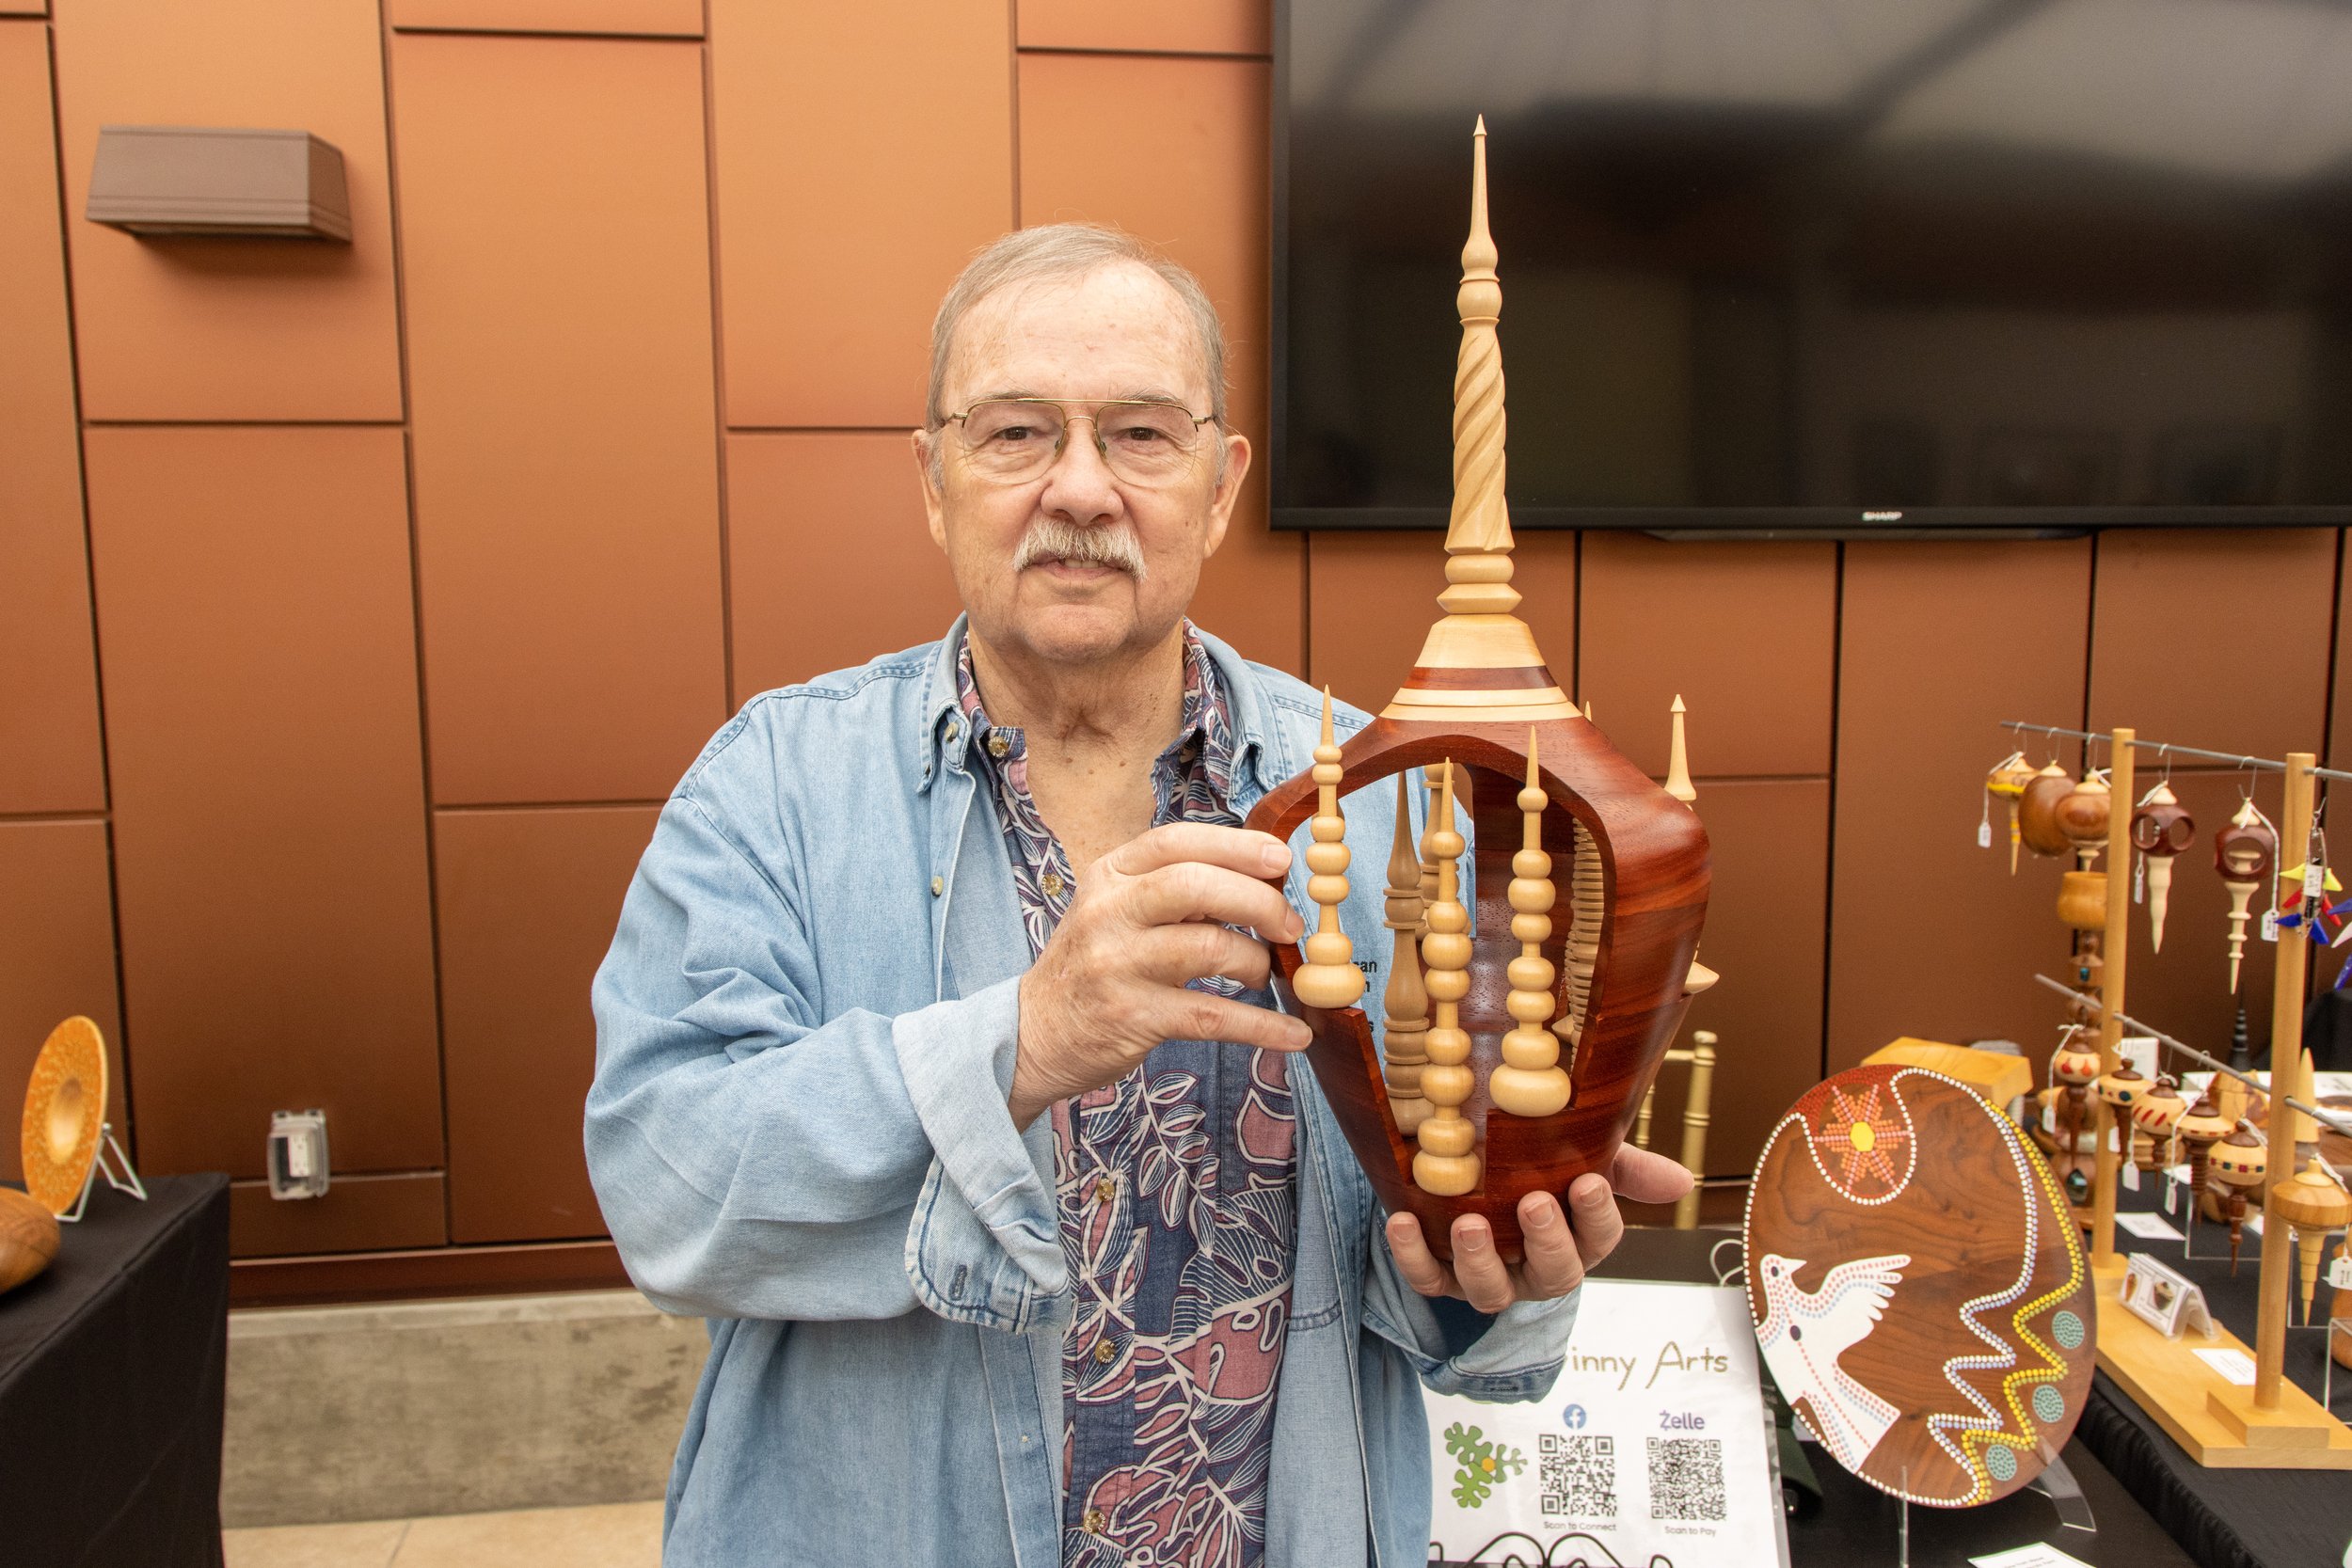 Joe Devinny, Wood Carver holding Finial Explosion made of rosewood basswood